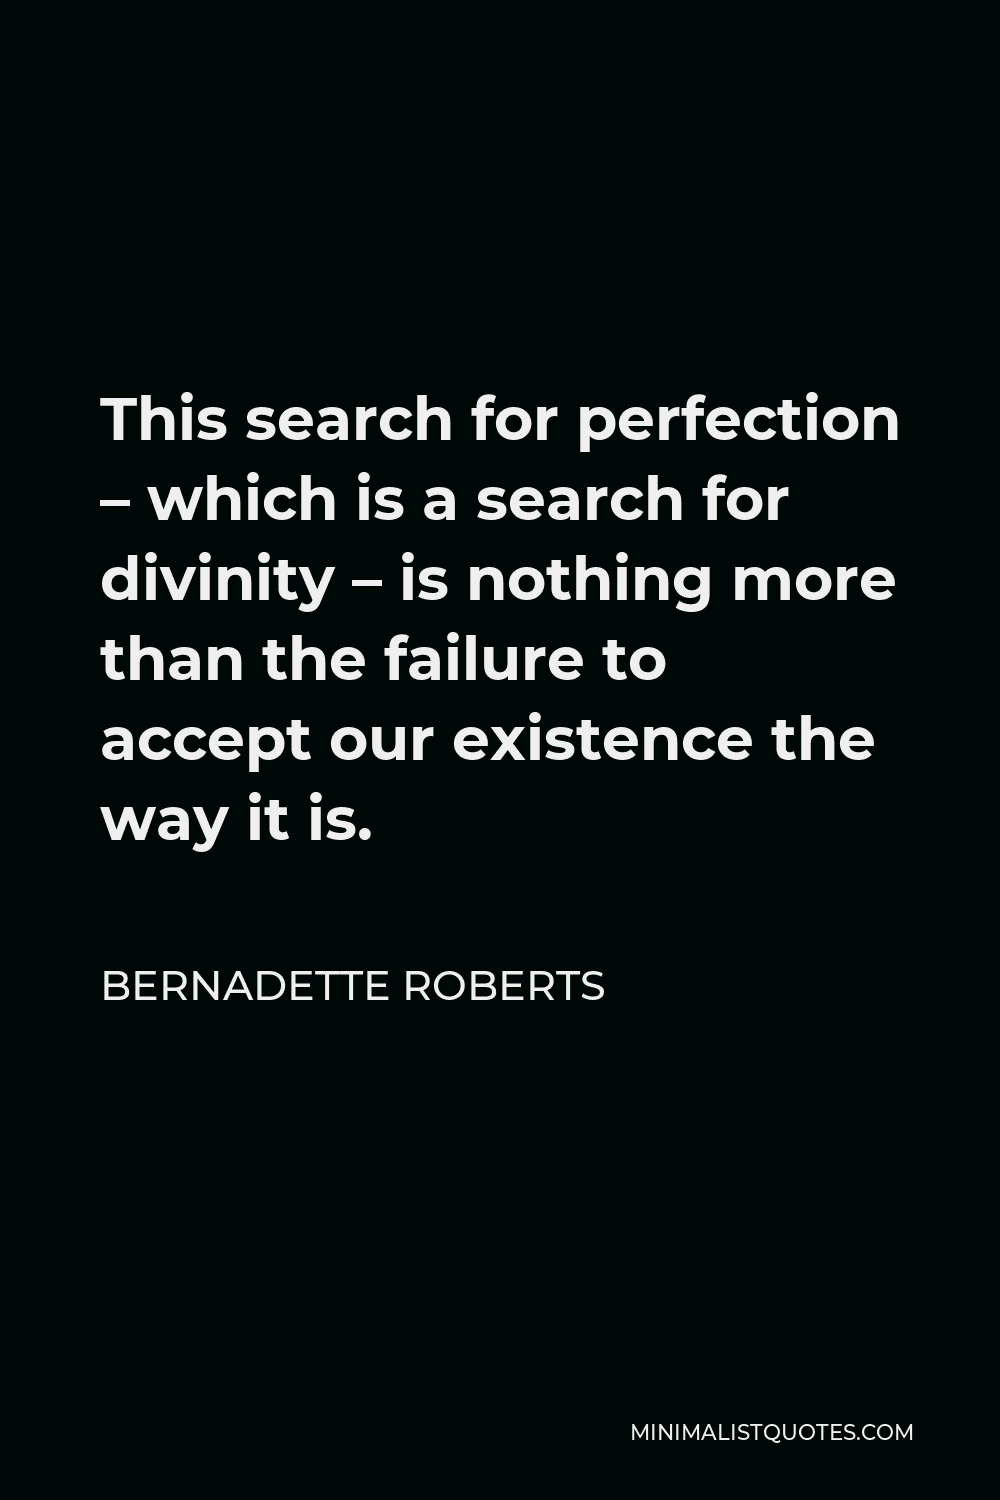 Bernadette Roberts Quote - This search for perfection – which is a search for divinity – is nothing more than the failure to accept our existence the way it is.